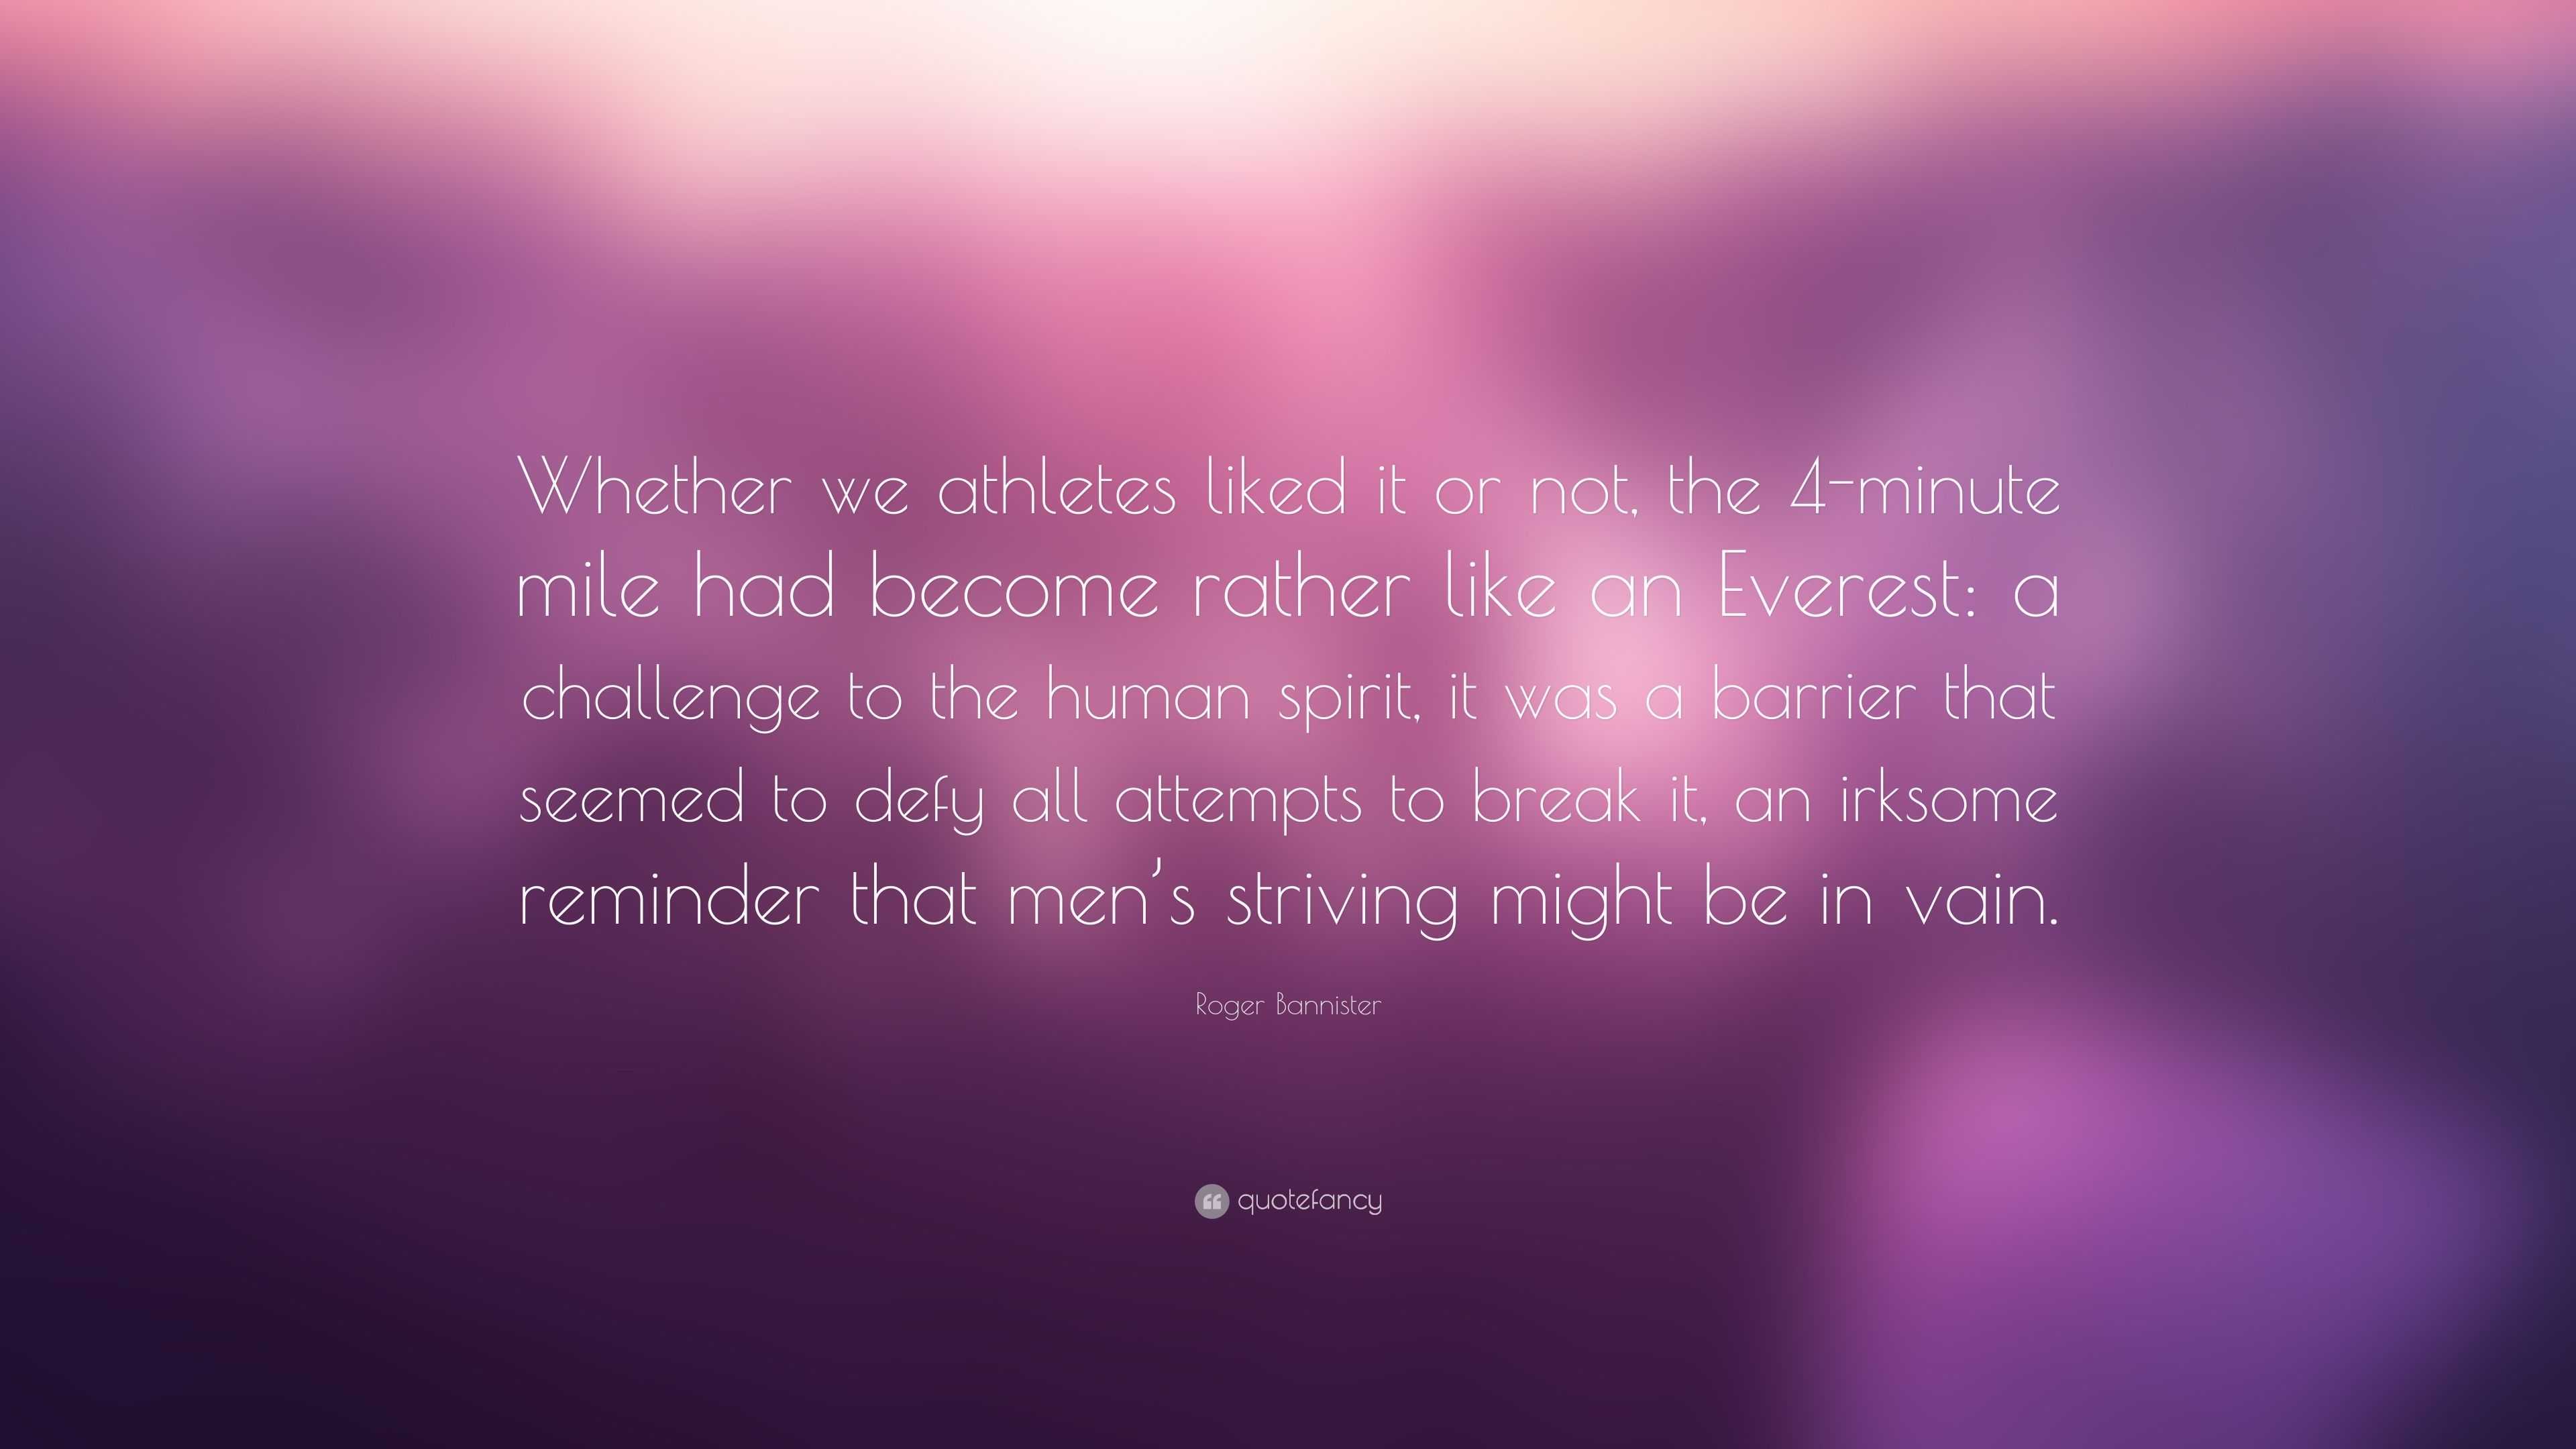 Roger Bannister Quote: “Whether we athletes liked it or not, the 4